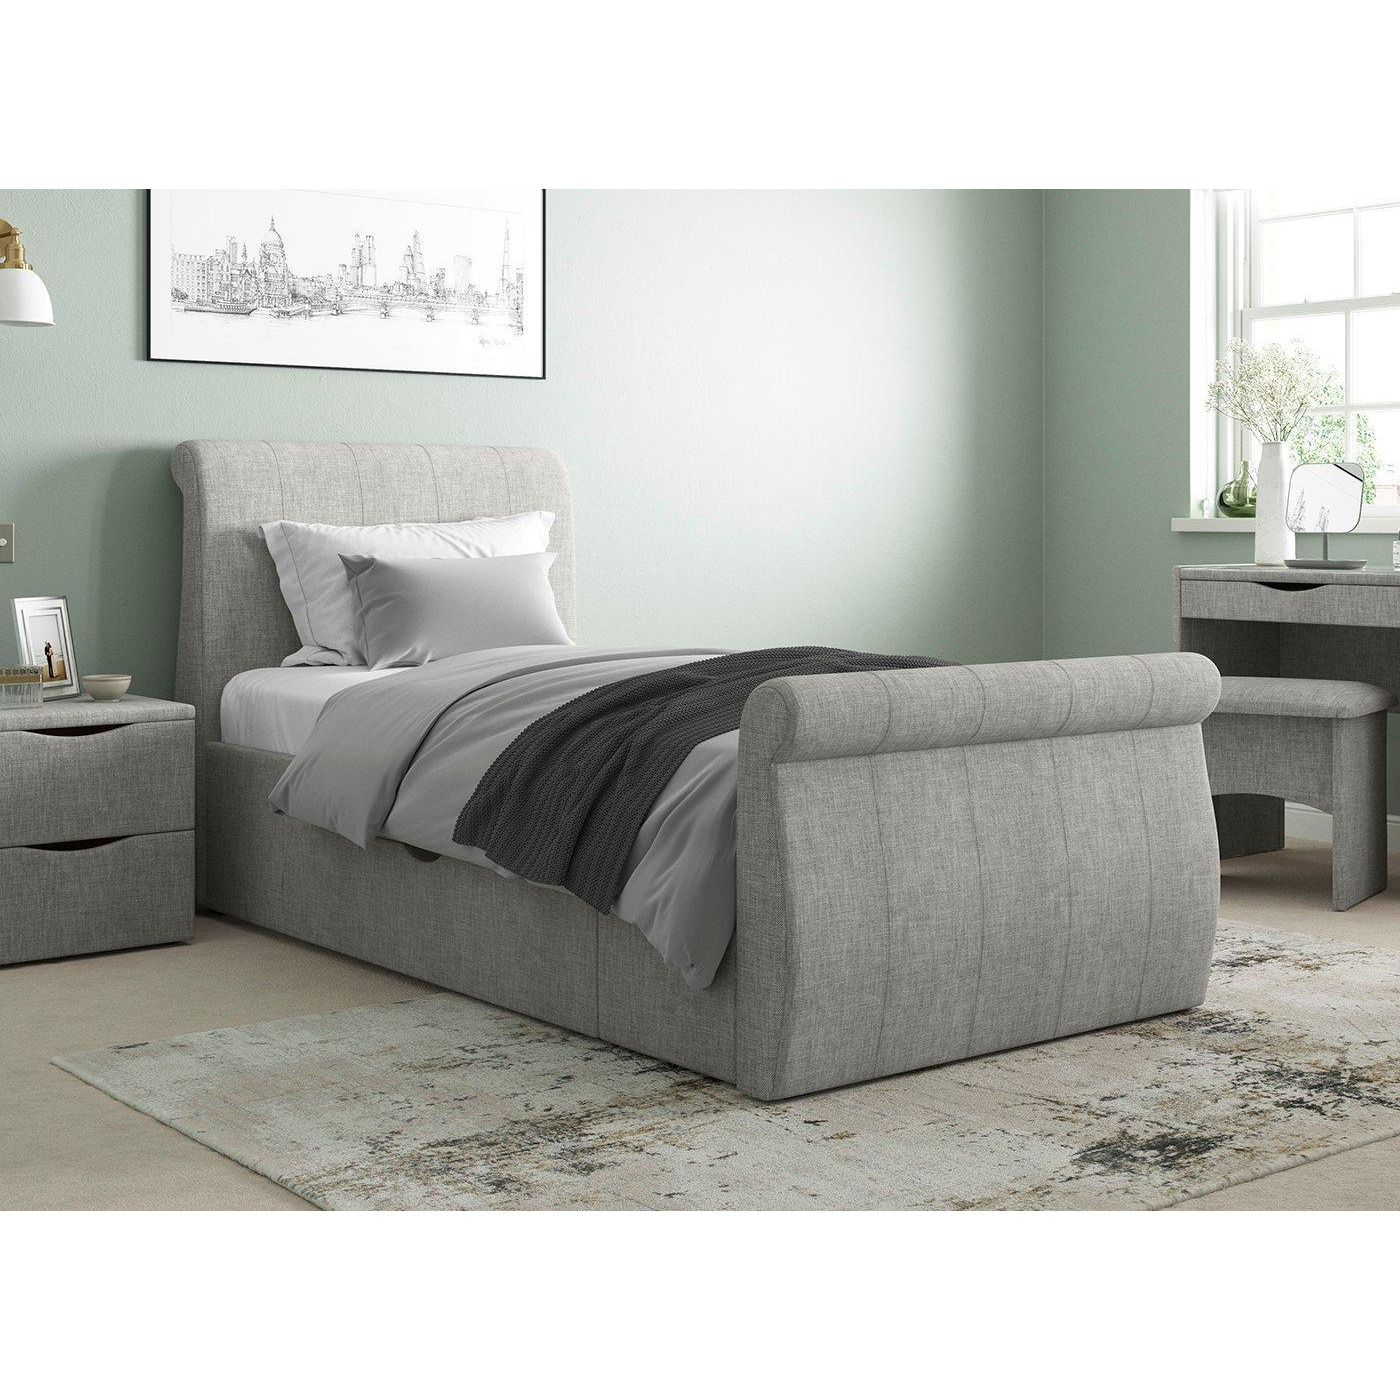 Lucia Upholstered Bed Frame - 3'0 Single - Silver